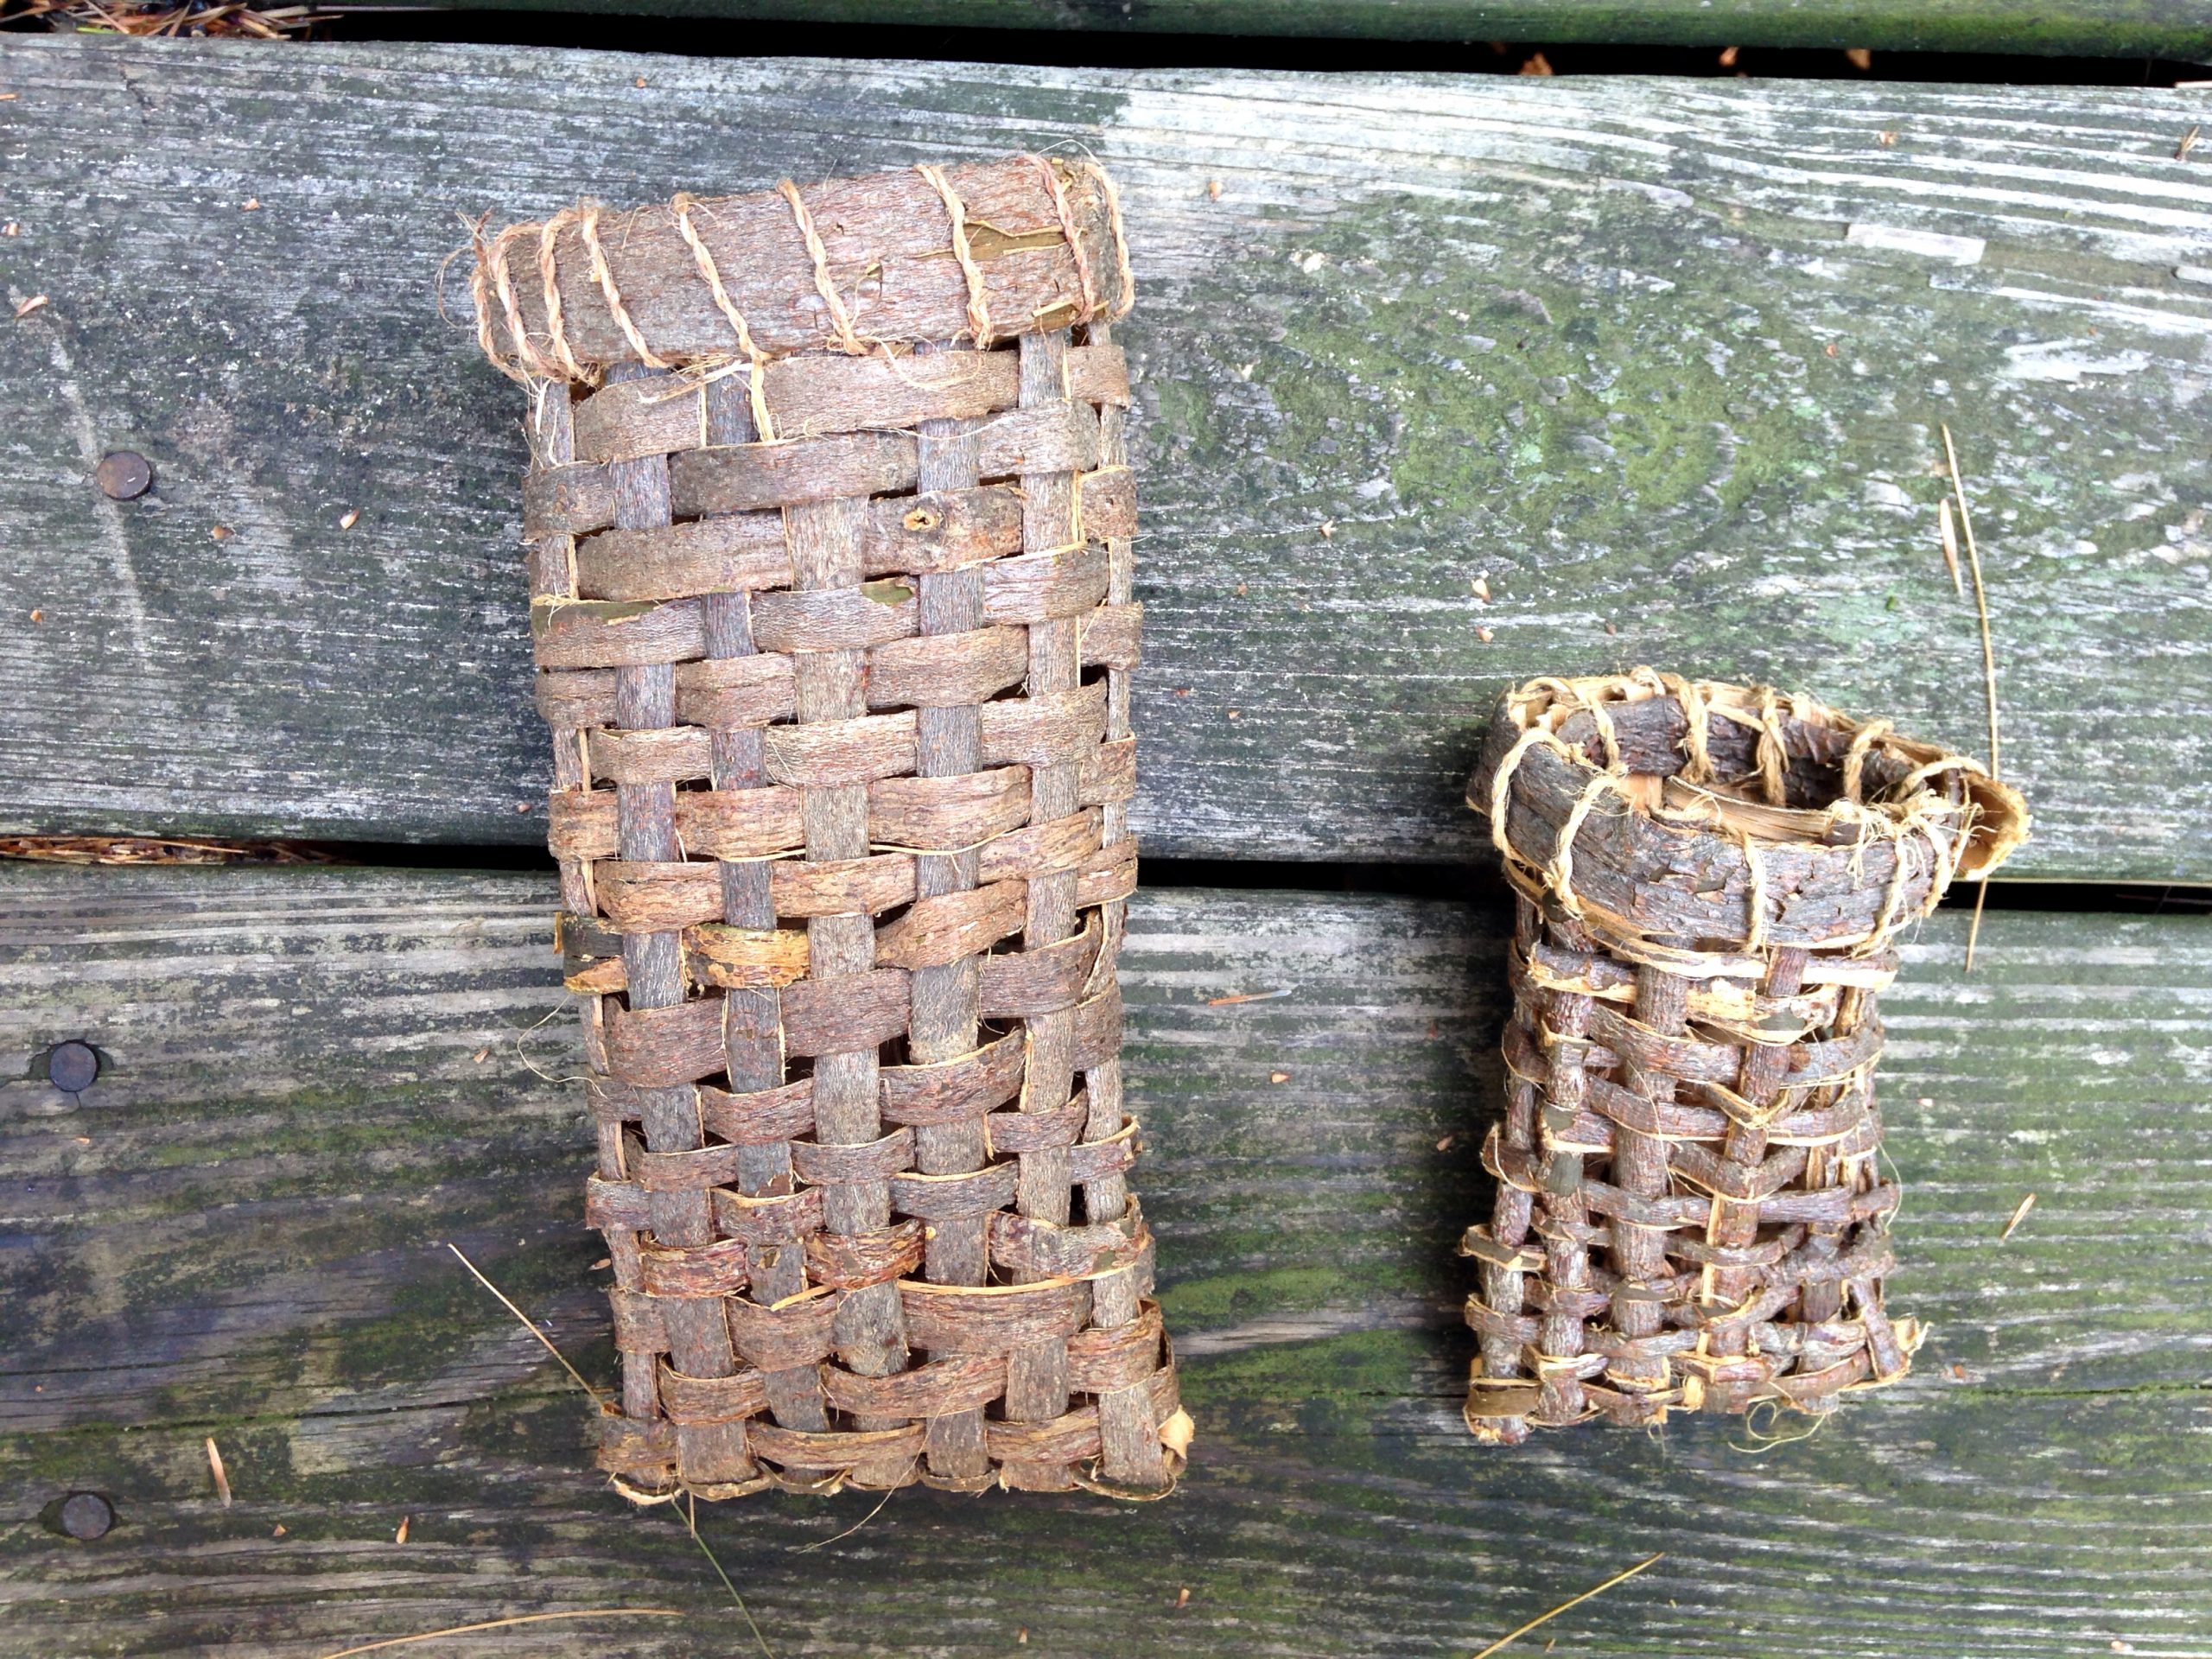 Processing Basswood Bark For Making Cordage And Baskets